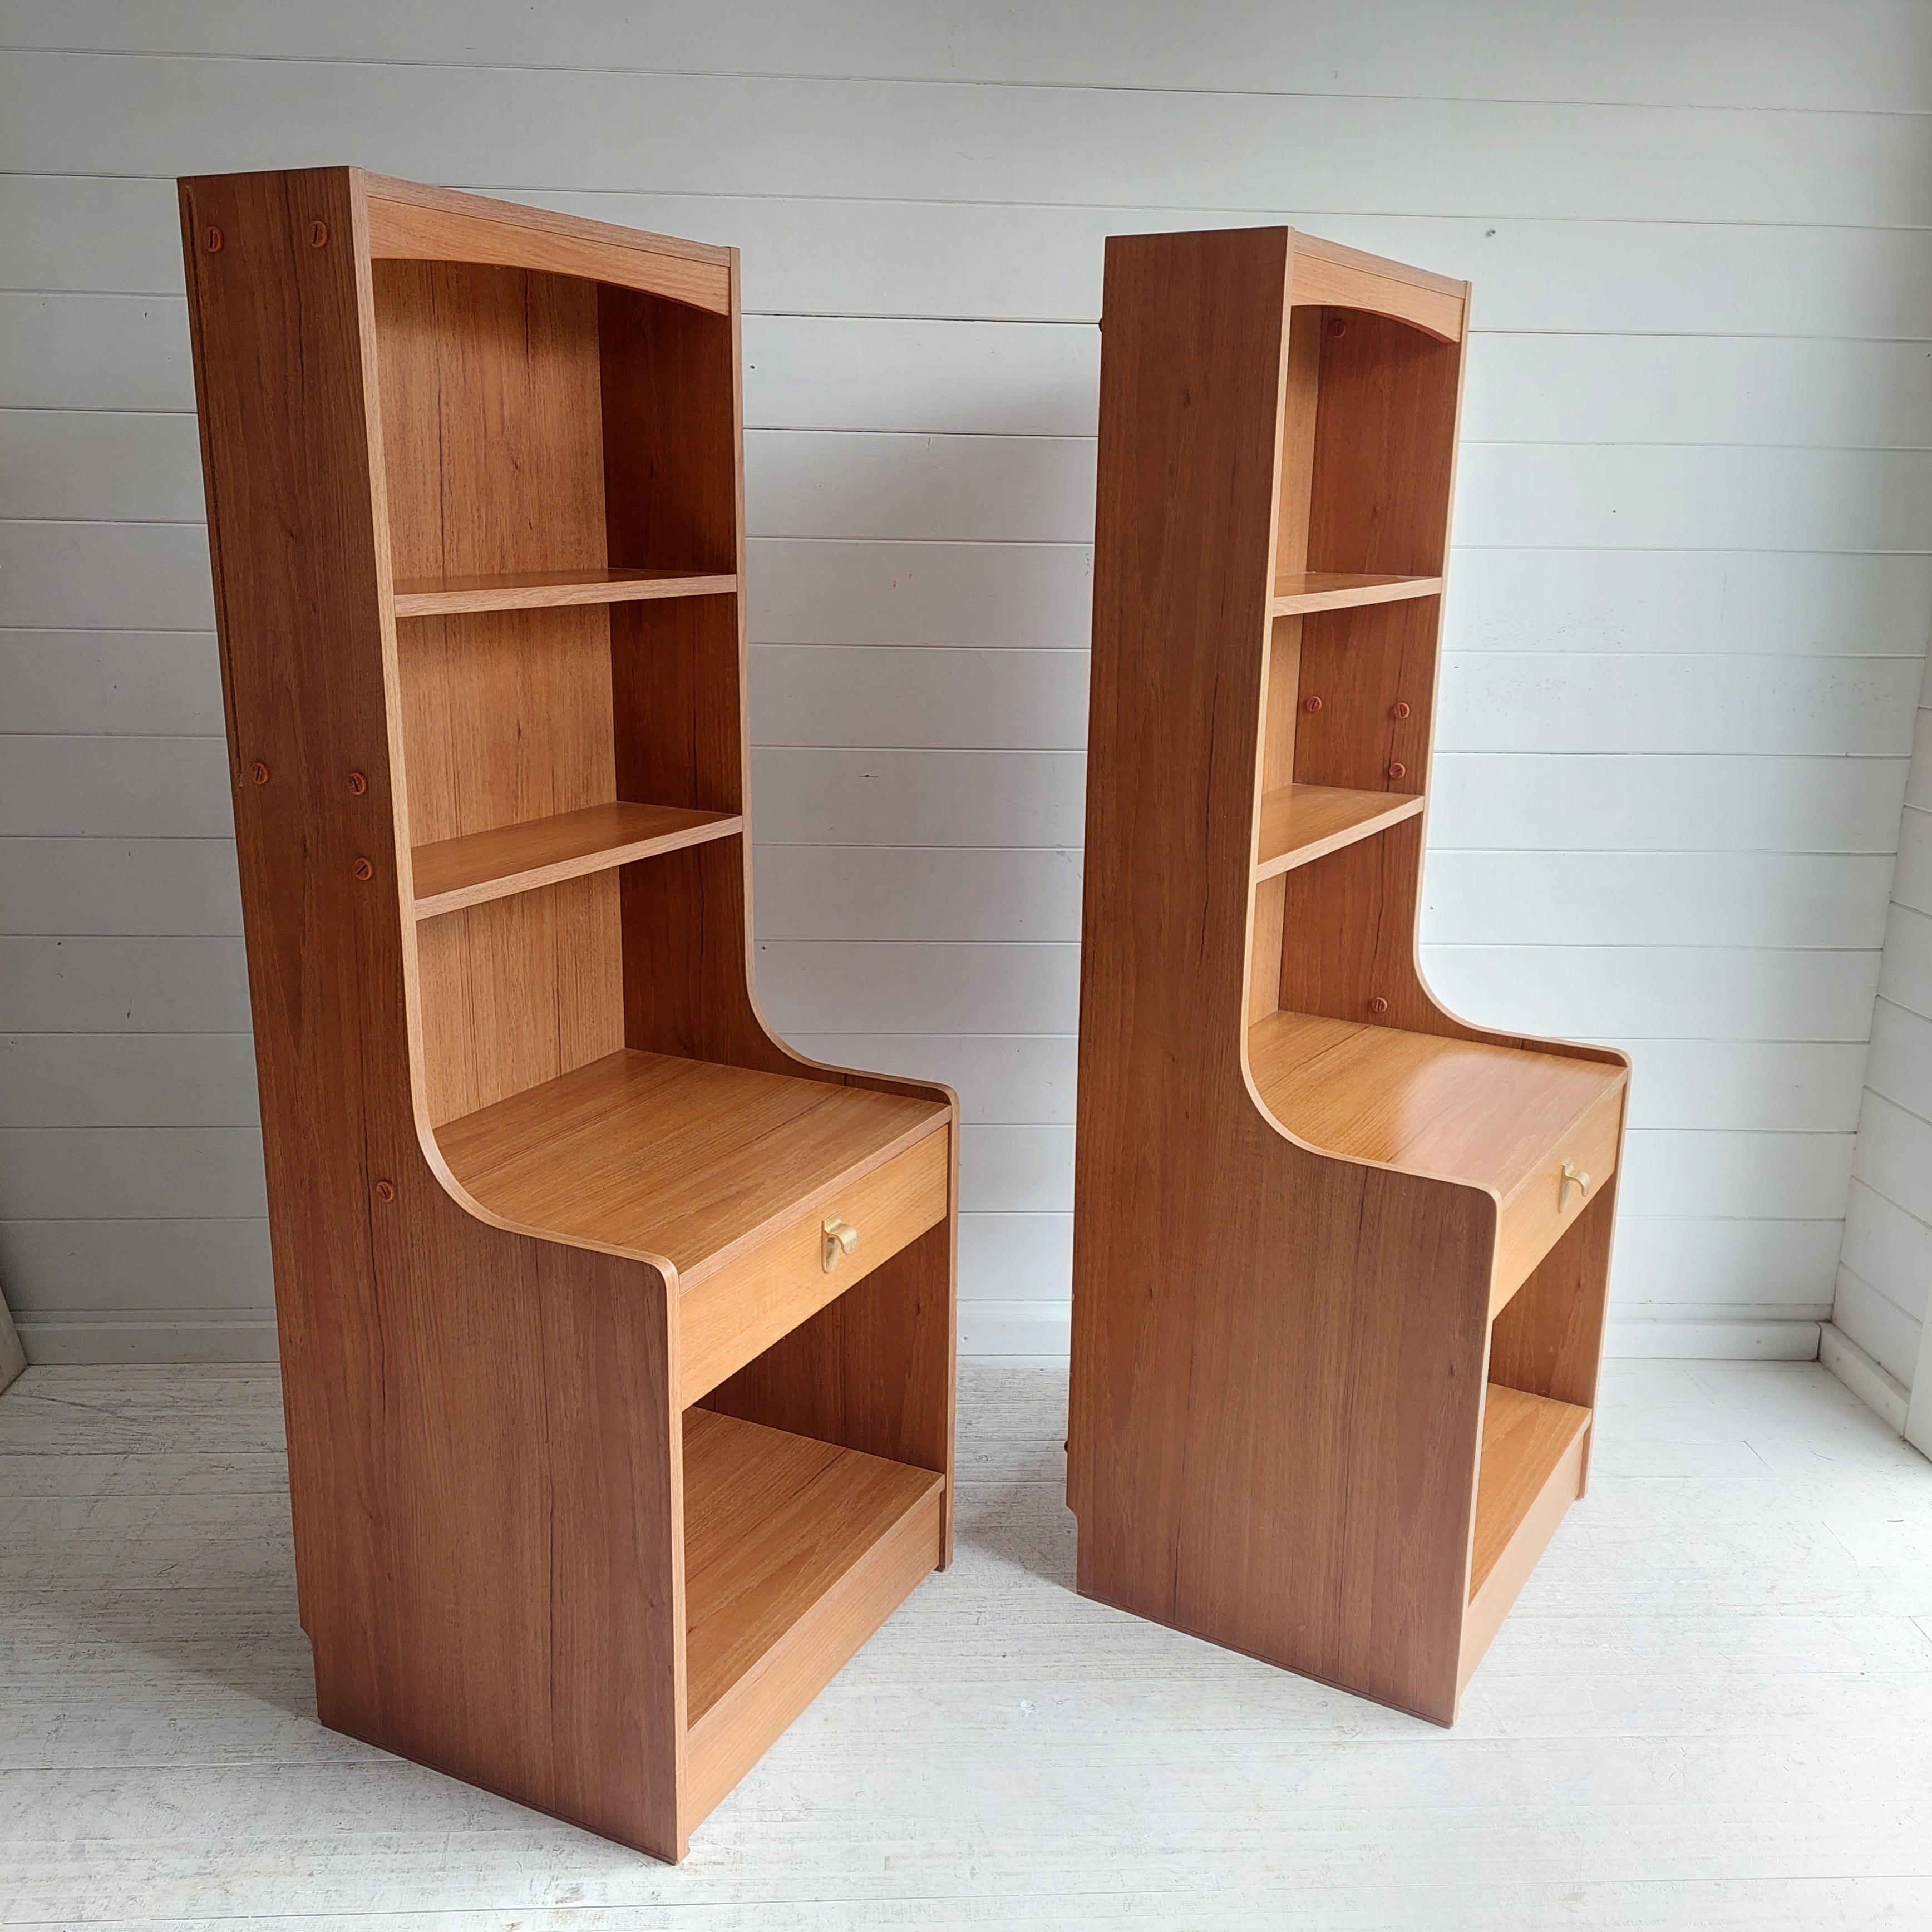 British Mid Century Pair of Teak effect Bedside Tables shelving units by Schreiber, 70s For Sale